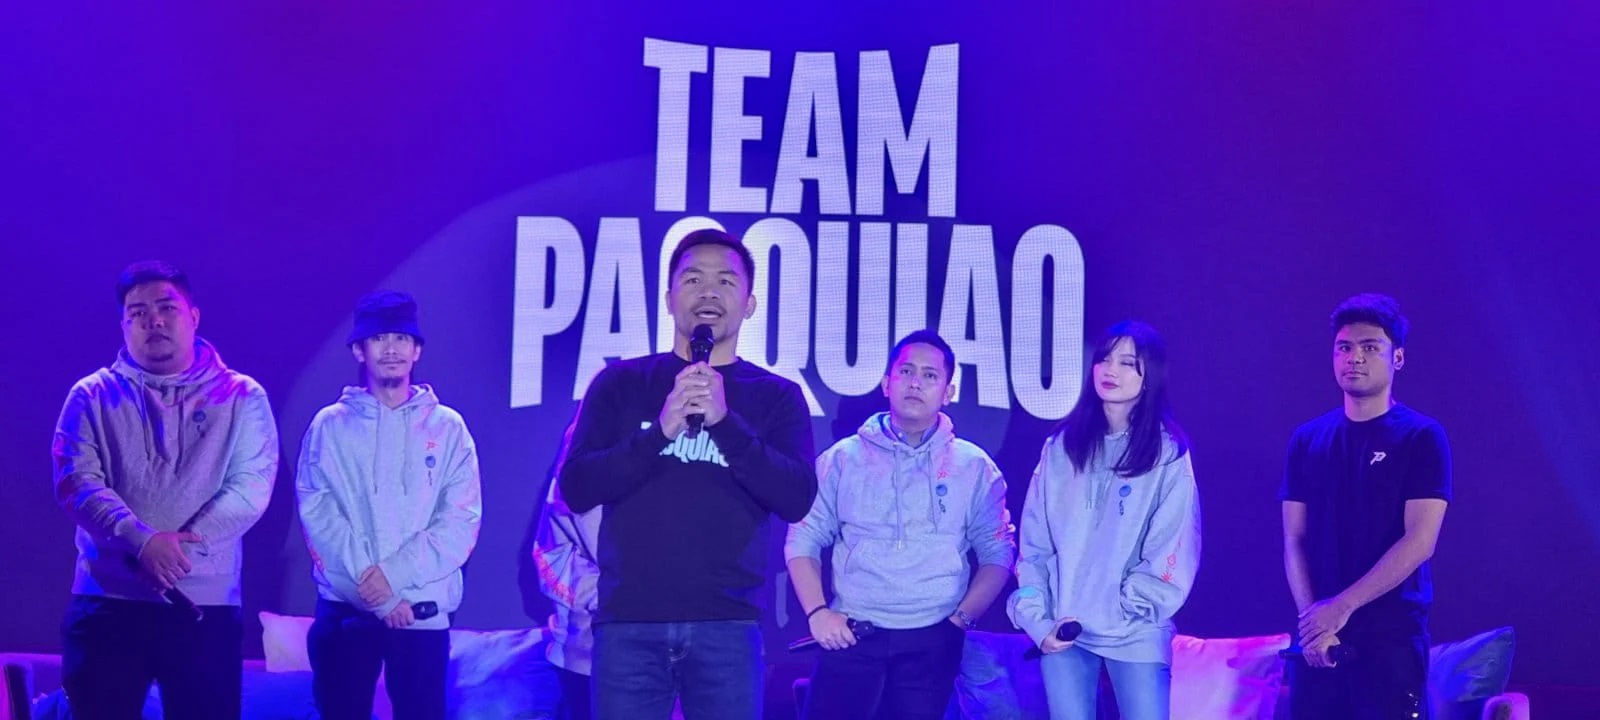 Pacquiao launches own ‘Team Pacquiao GG’ esports team